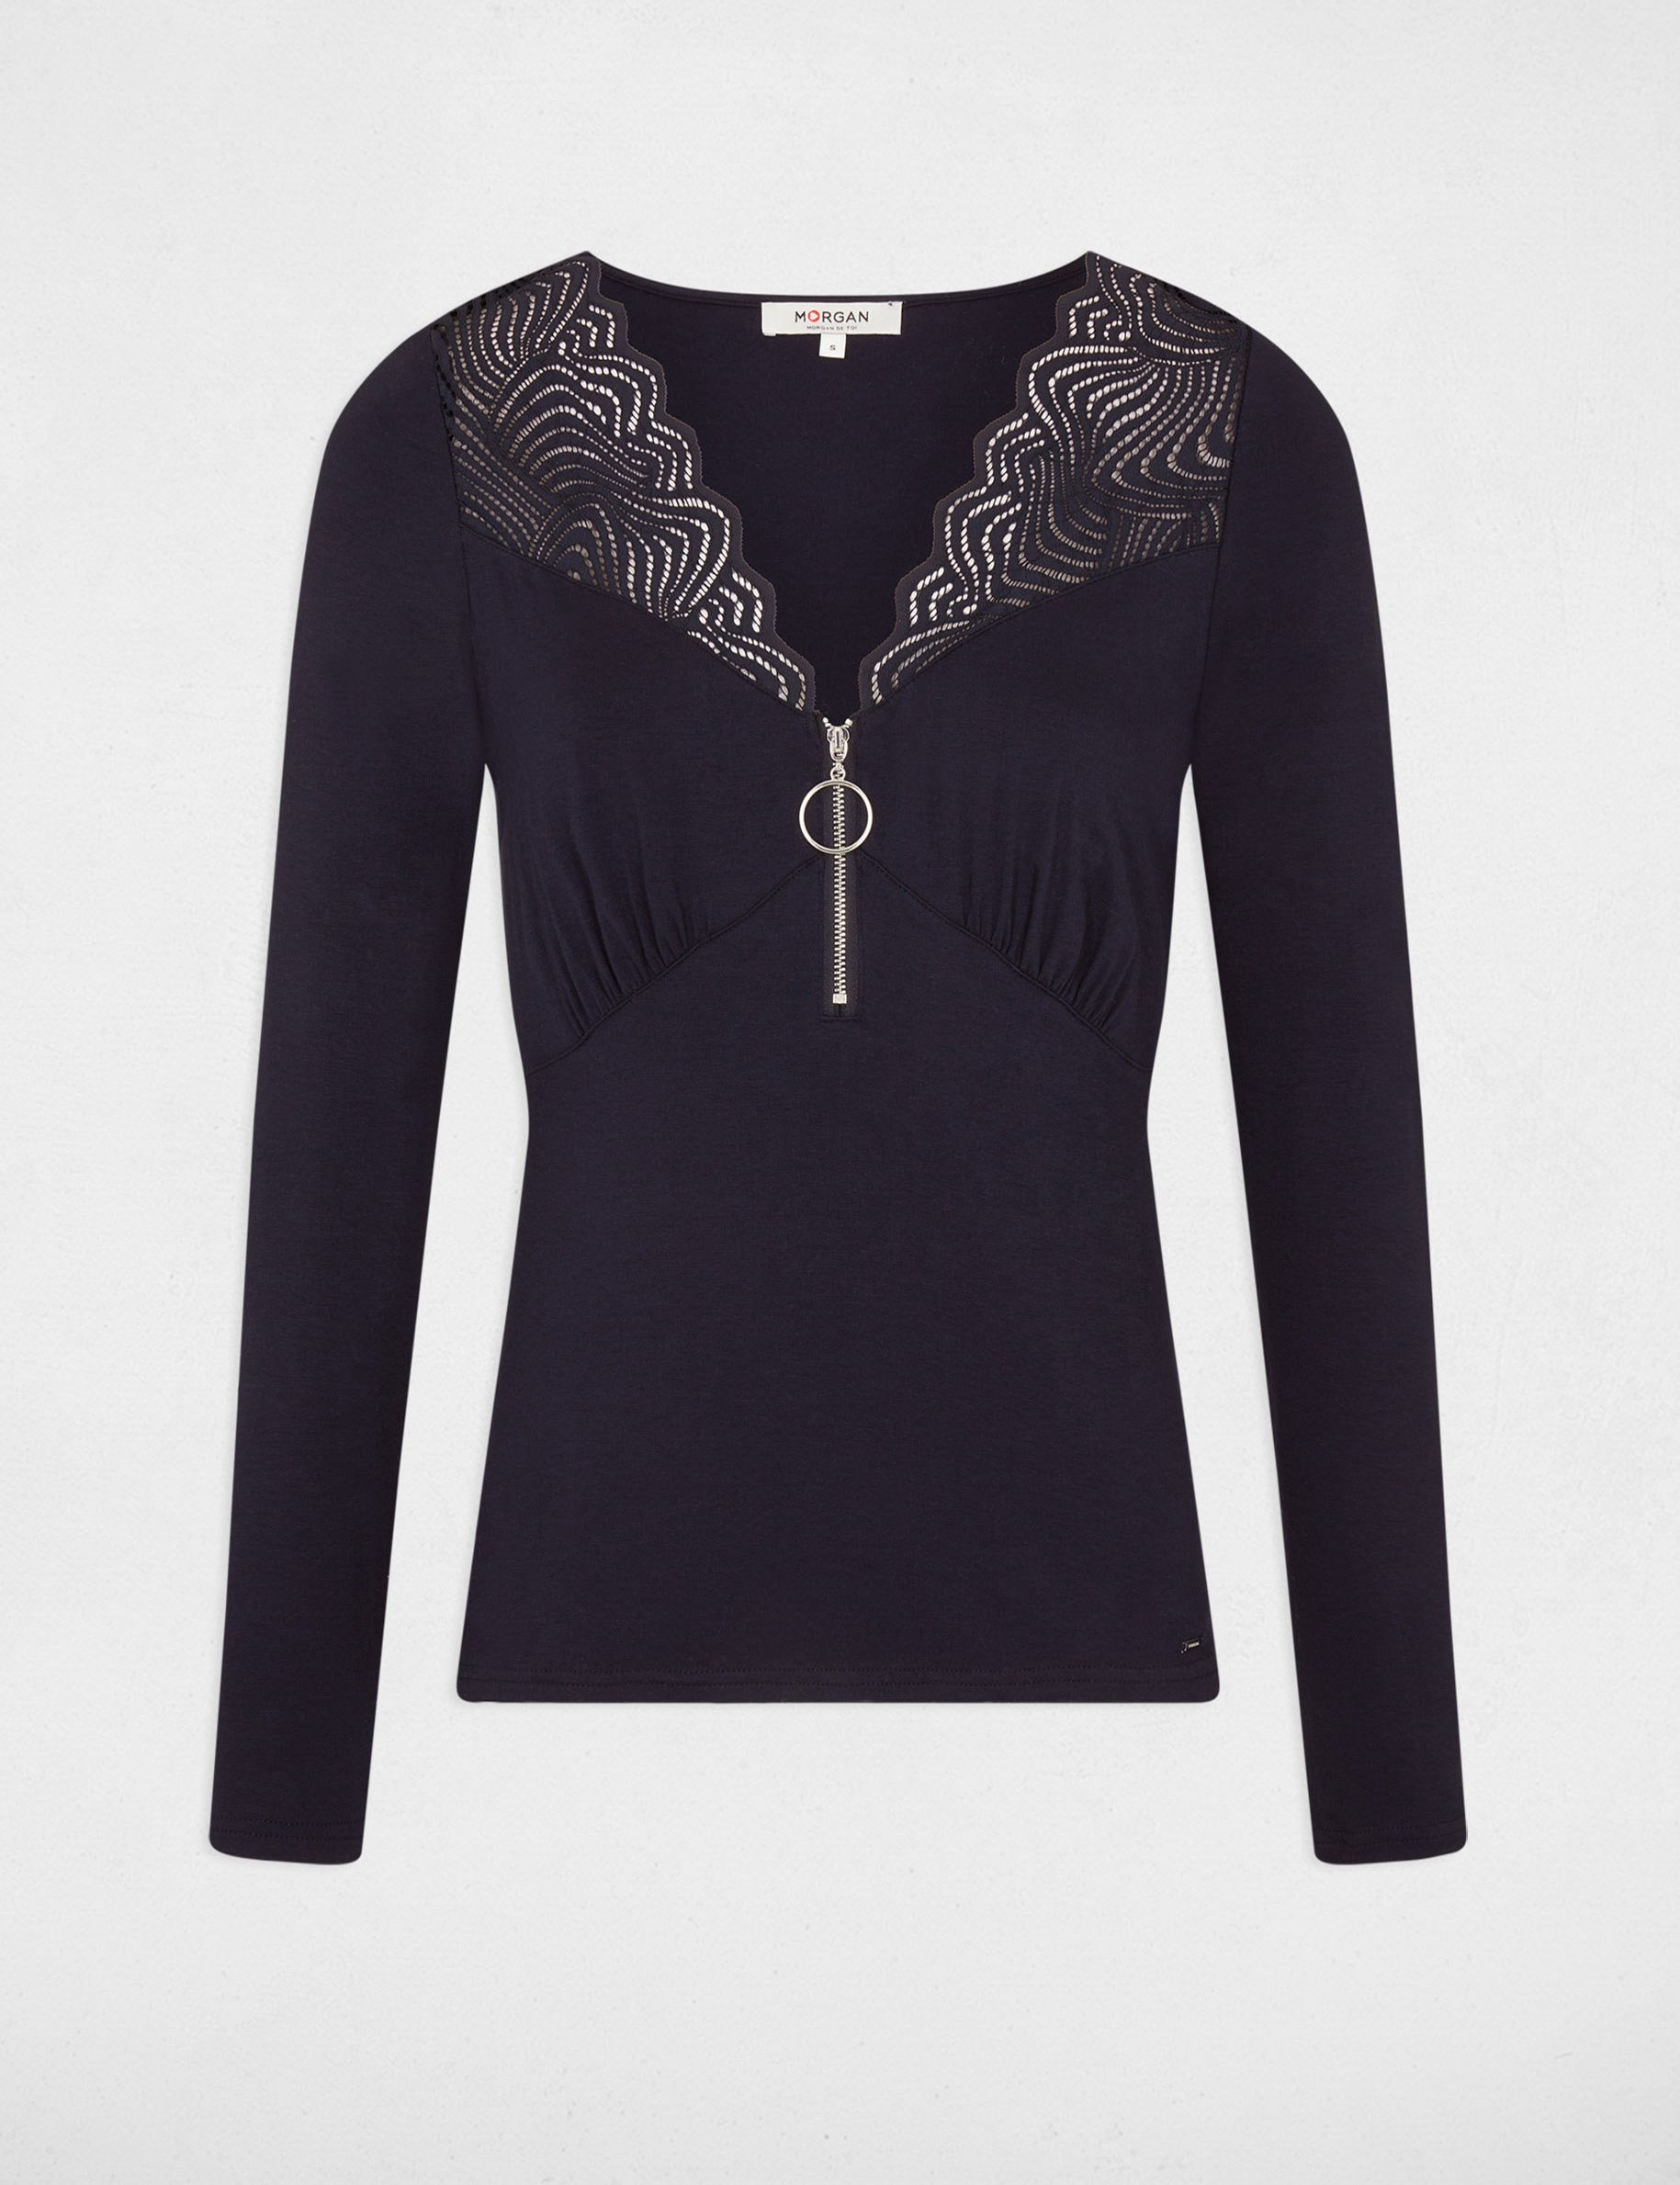 Long-sleeved t-shirt collar with lace navy ladies'